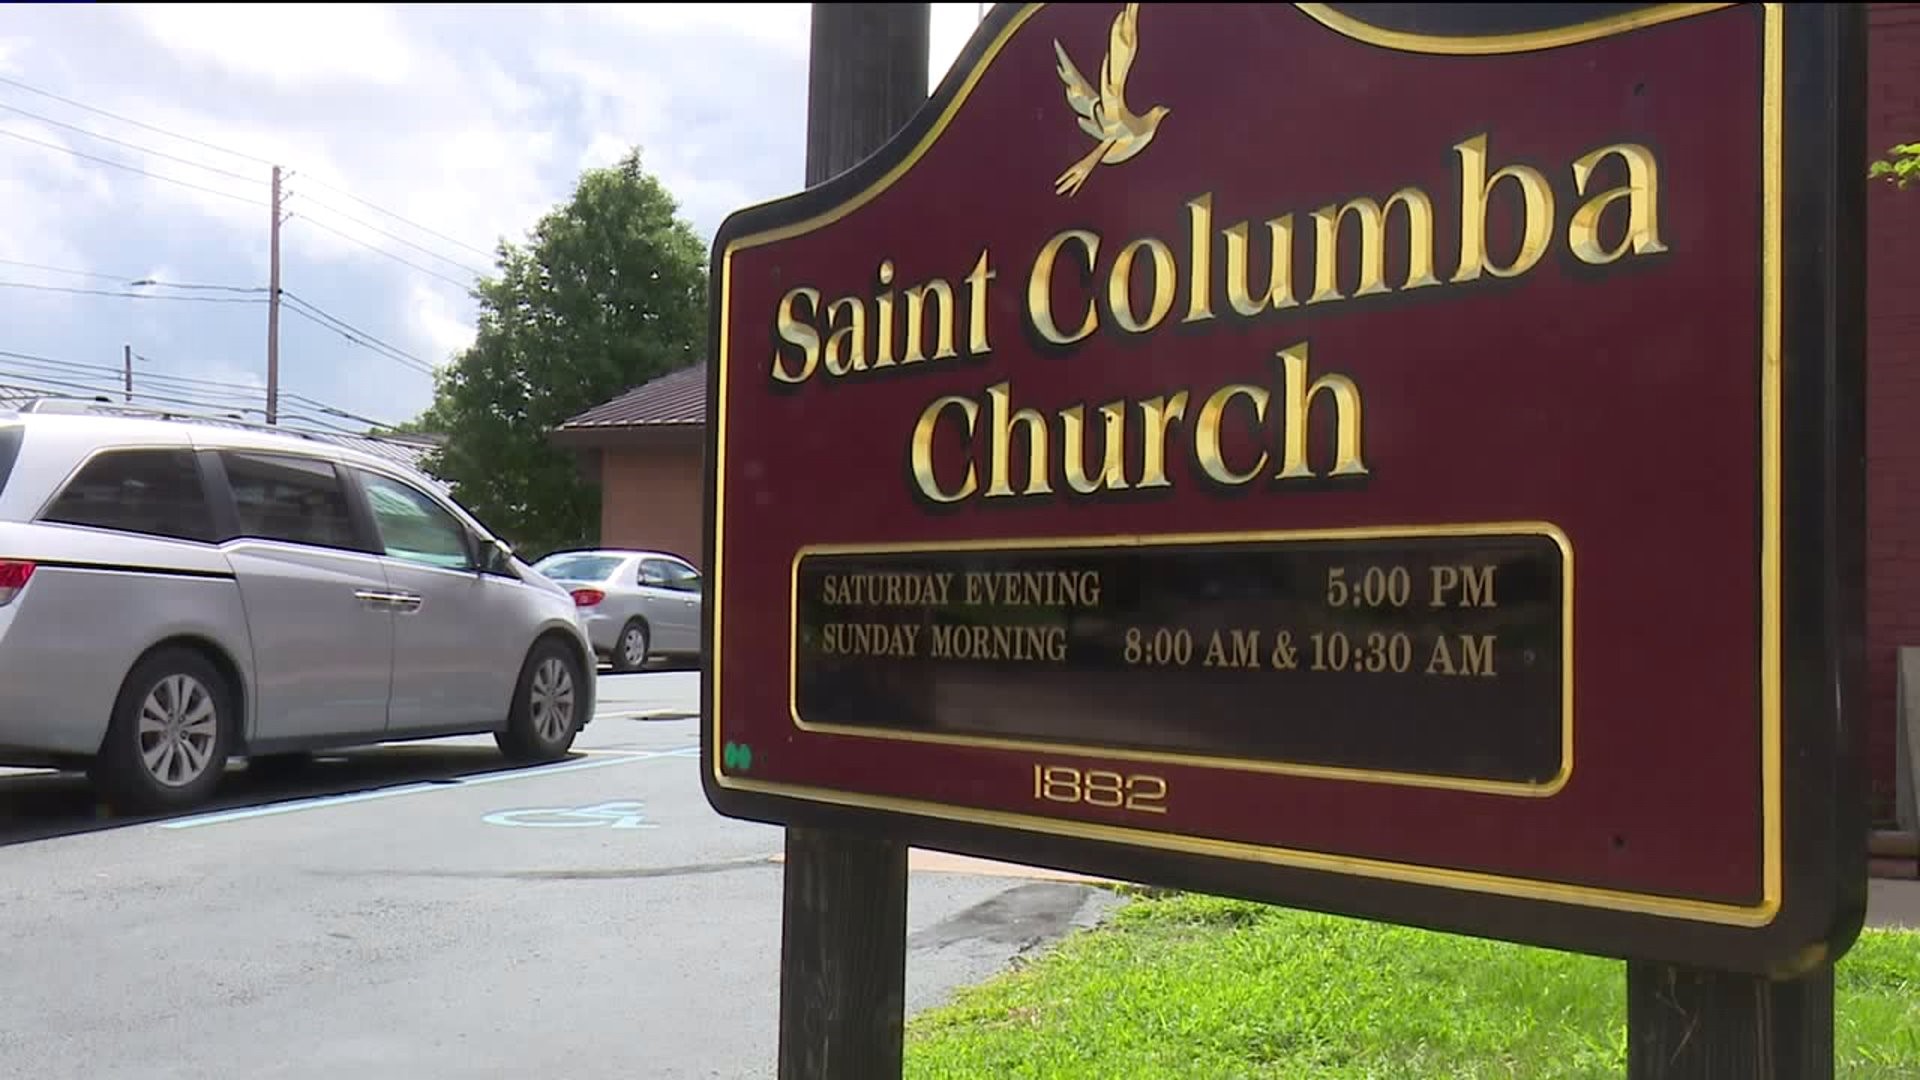 Priests Accused in Harrisburg Diocese Served in Our Area